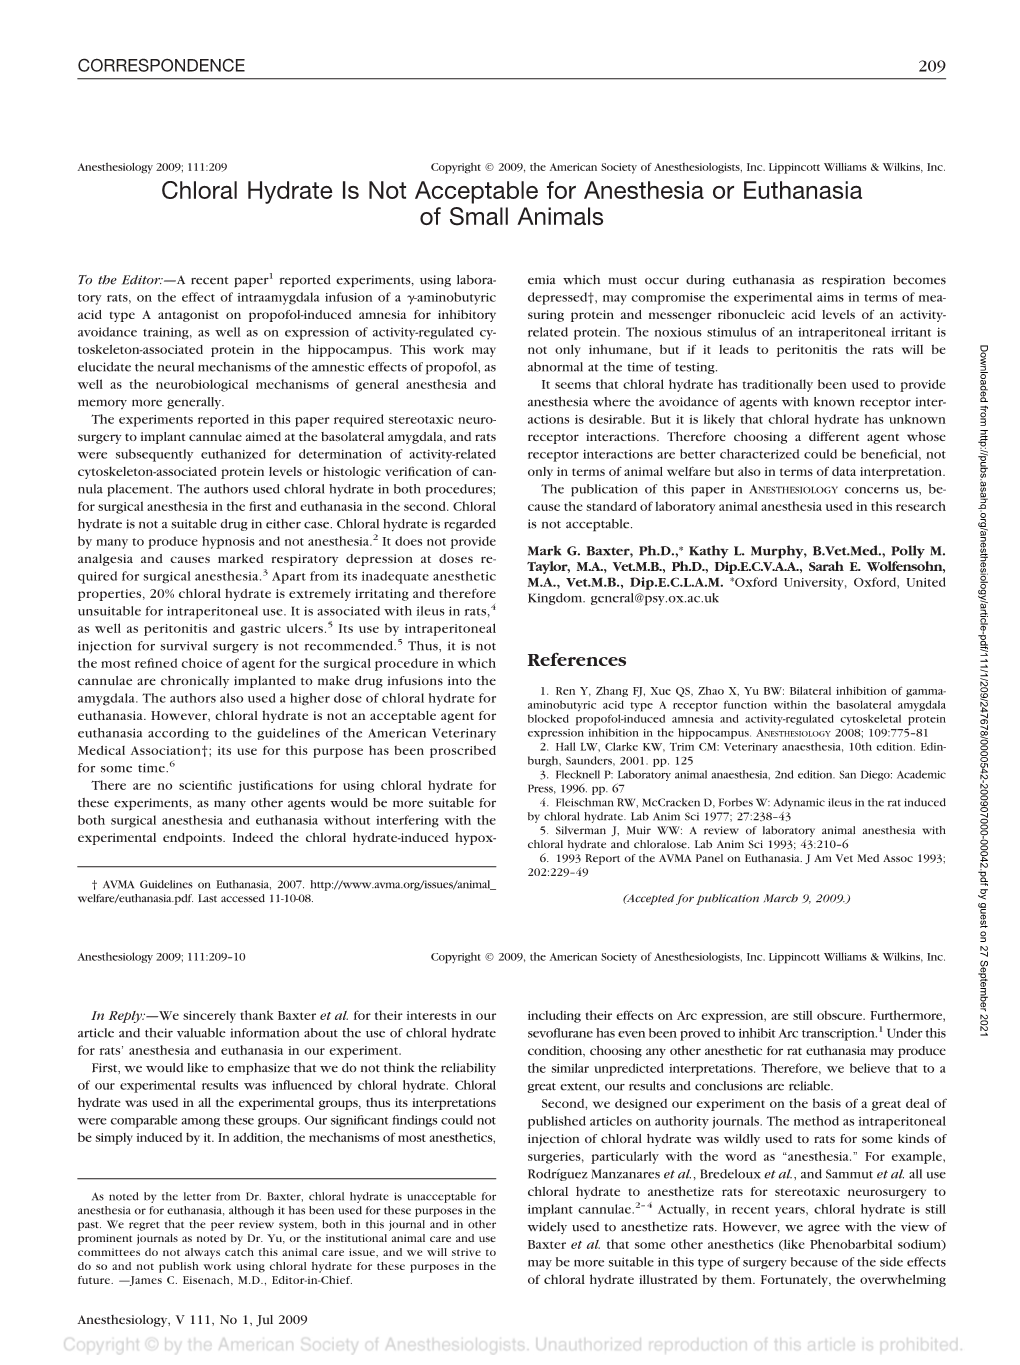 Chloral Hydrate Is Not Acceptable for Anesthesia Or Euthanasia of Small Animals